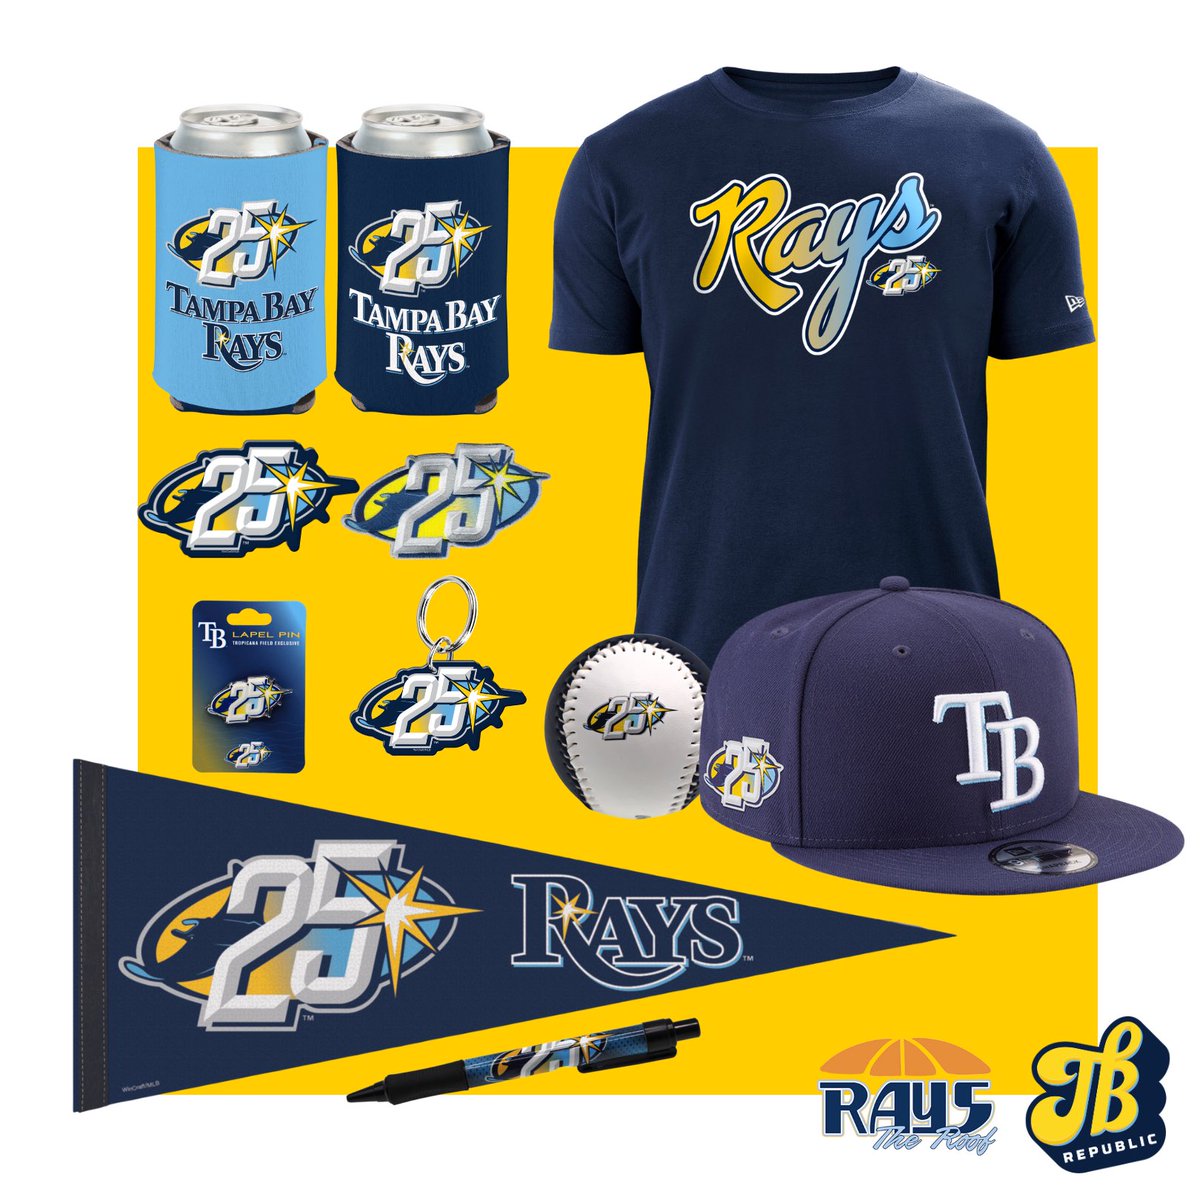 The Bay Republic on X: Today officially marks 25 years since the Rays  first hit the field! To celebrate, we're teaming up with @RaysTheRoofTB to  giveaway a Tampa Bay Rays 25th Anniversary